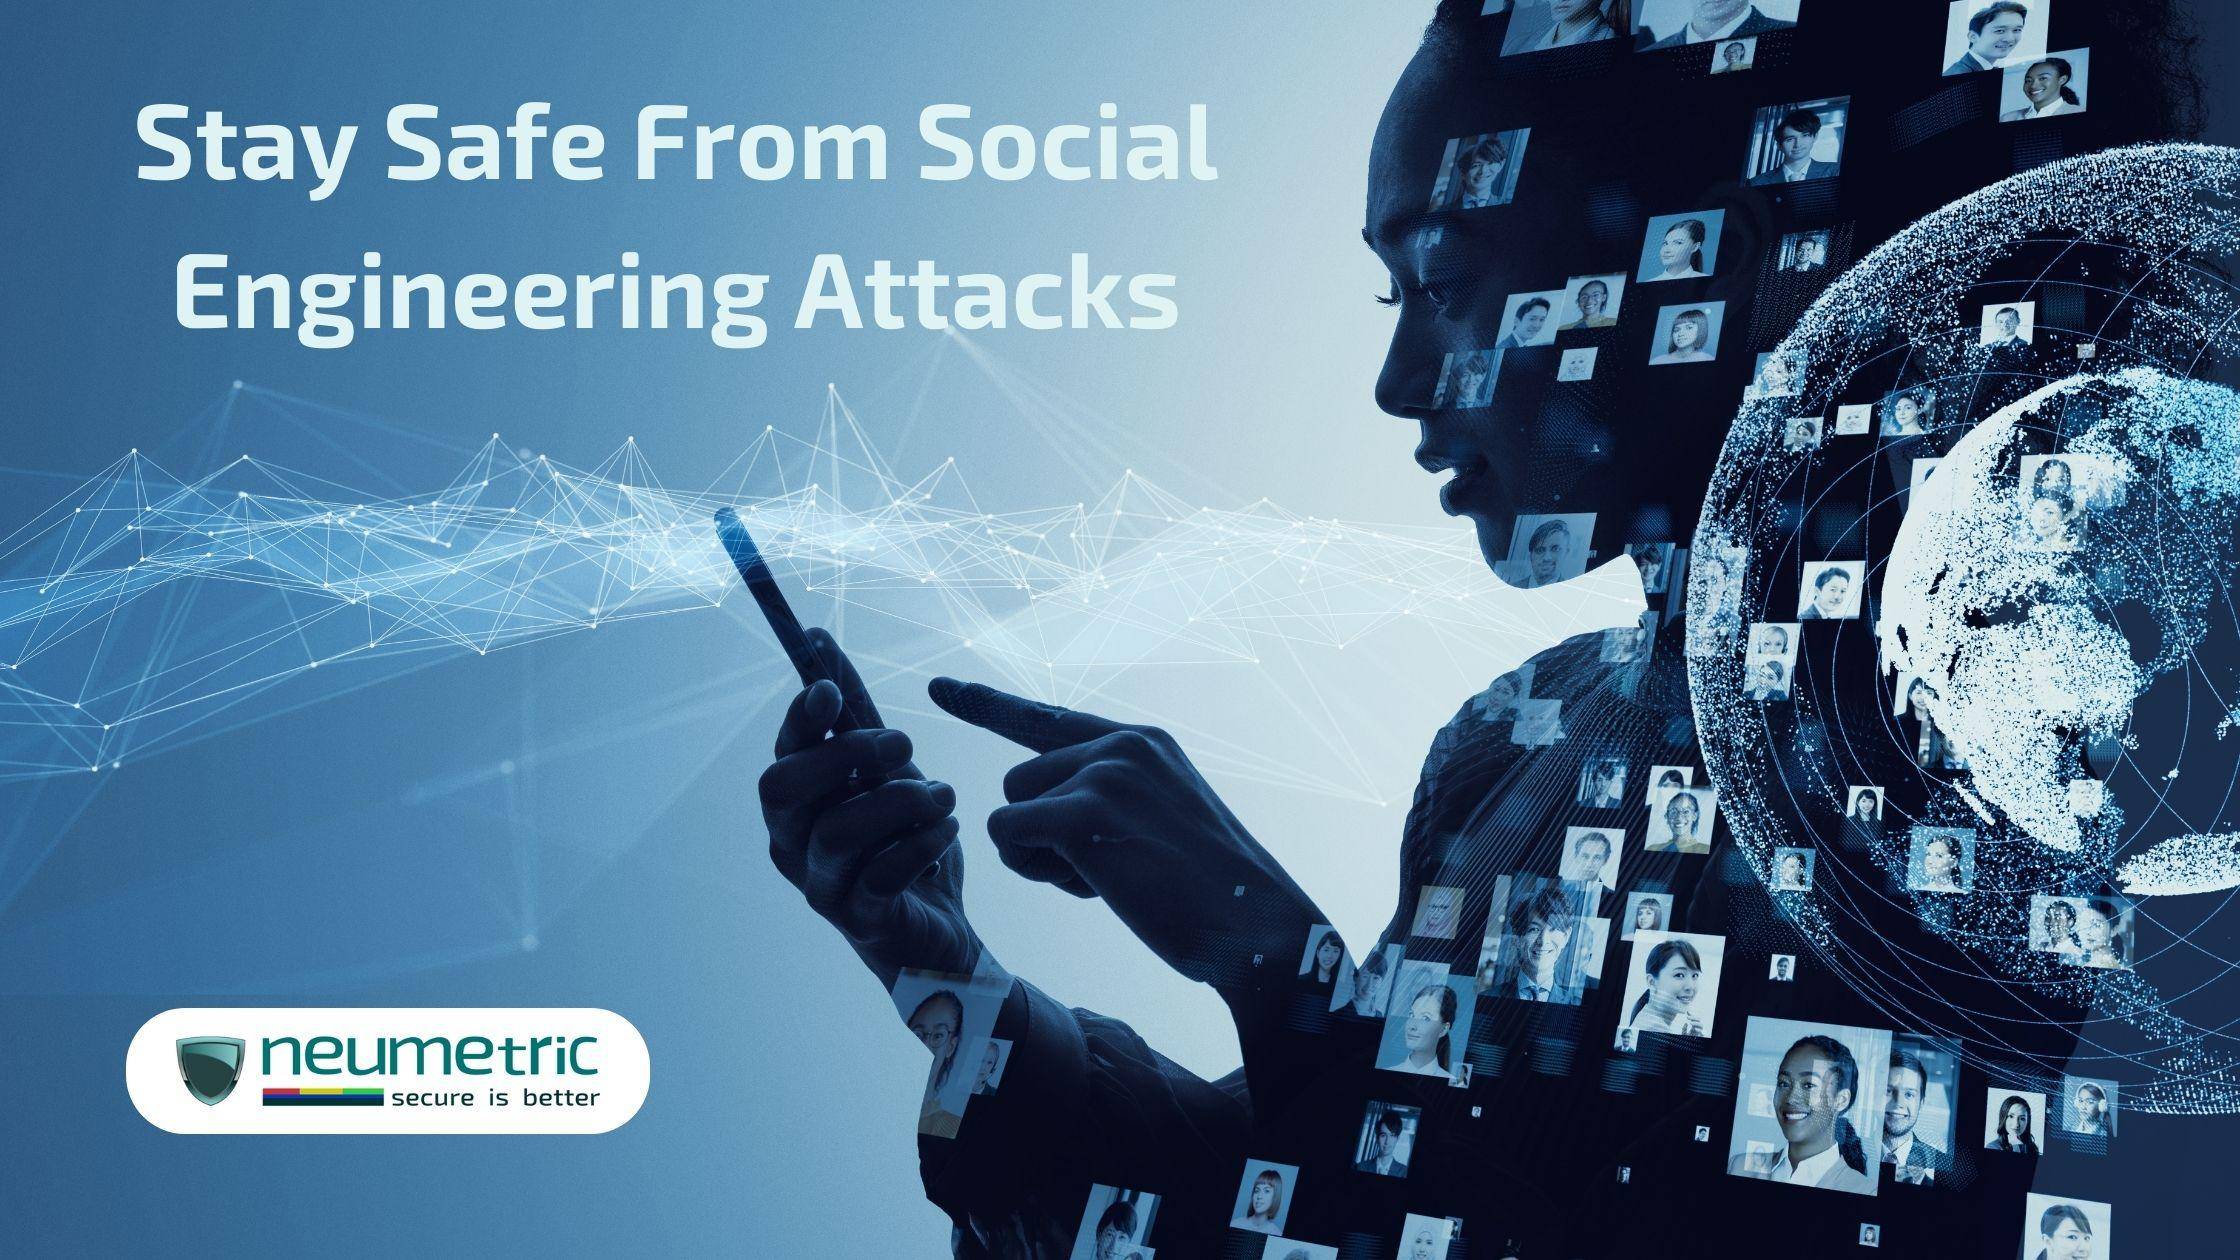 How can you protect yourself from social engineering?